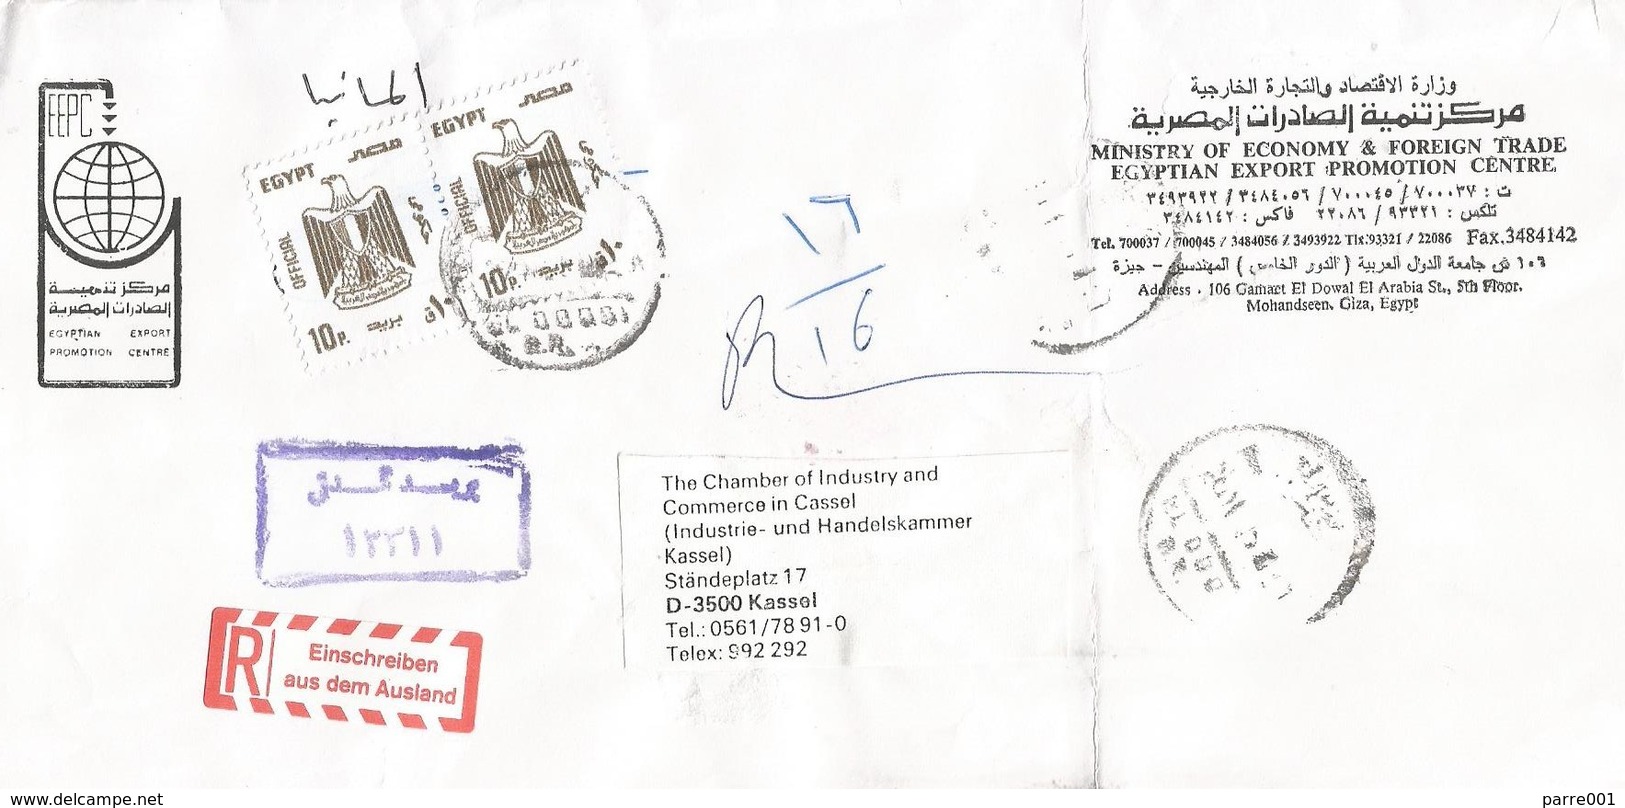 Egypt 2011 Giza Michel 112 Michel 128 Official Registered Cover - Officials